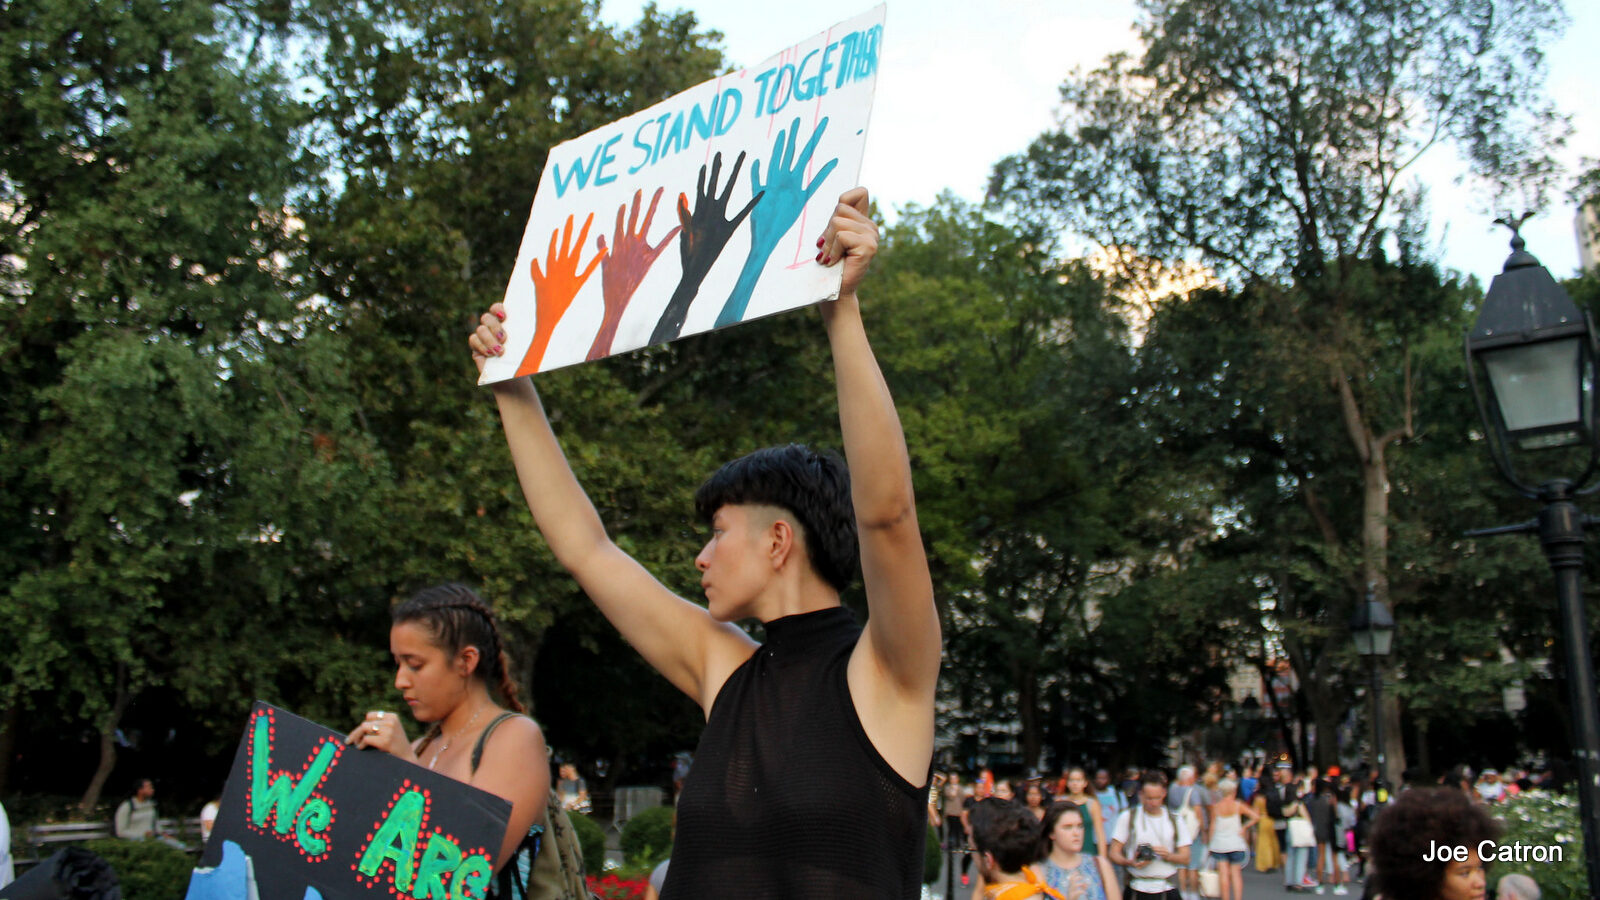 Hundreds rally Washington Square Park in New York to support Native land and water defenders opposing the Dakota Access Pipeline in Standing Rock, North Dakota on Friday. September 9, 2016.